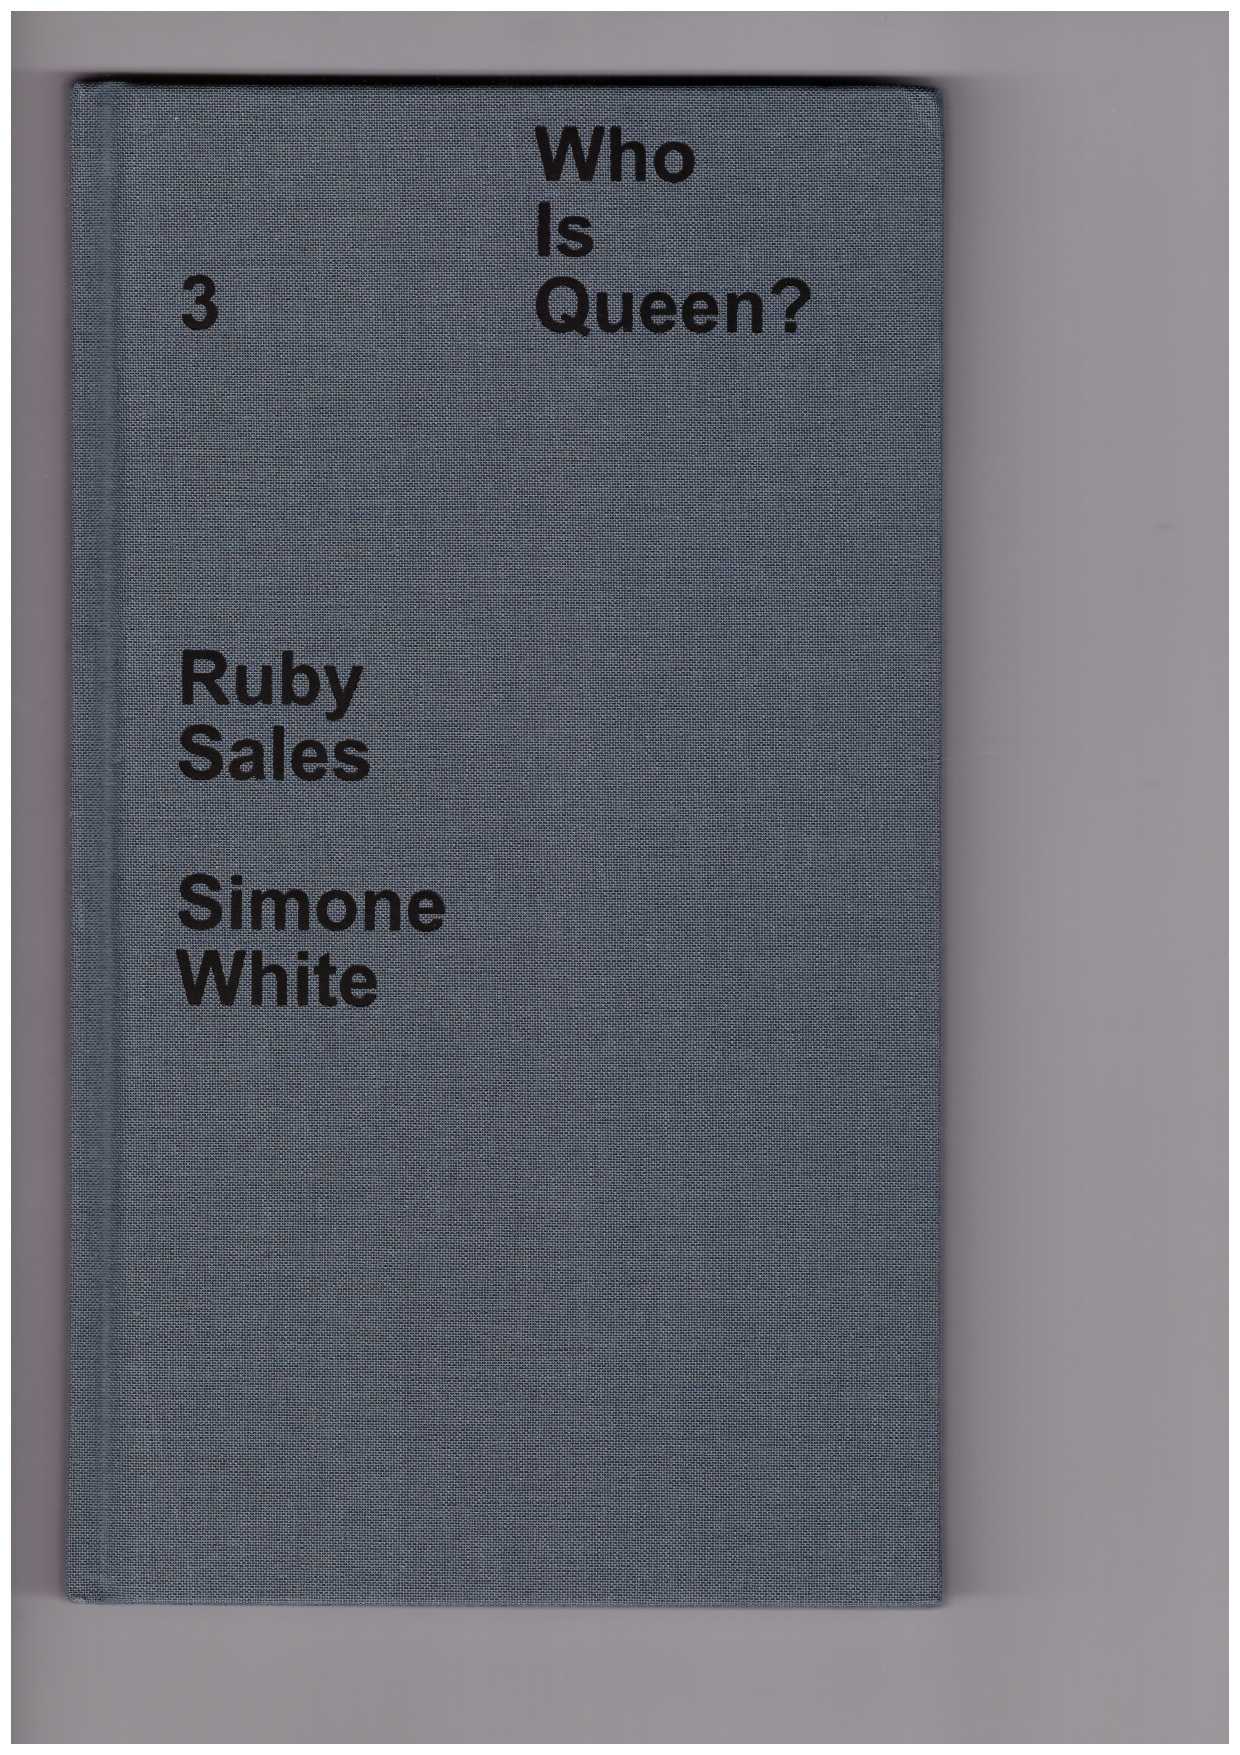 SALES, Ruby; WHITE, Simone  - Who Is Queen? 3: Ruby Sales, Simone White